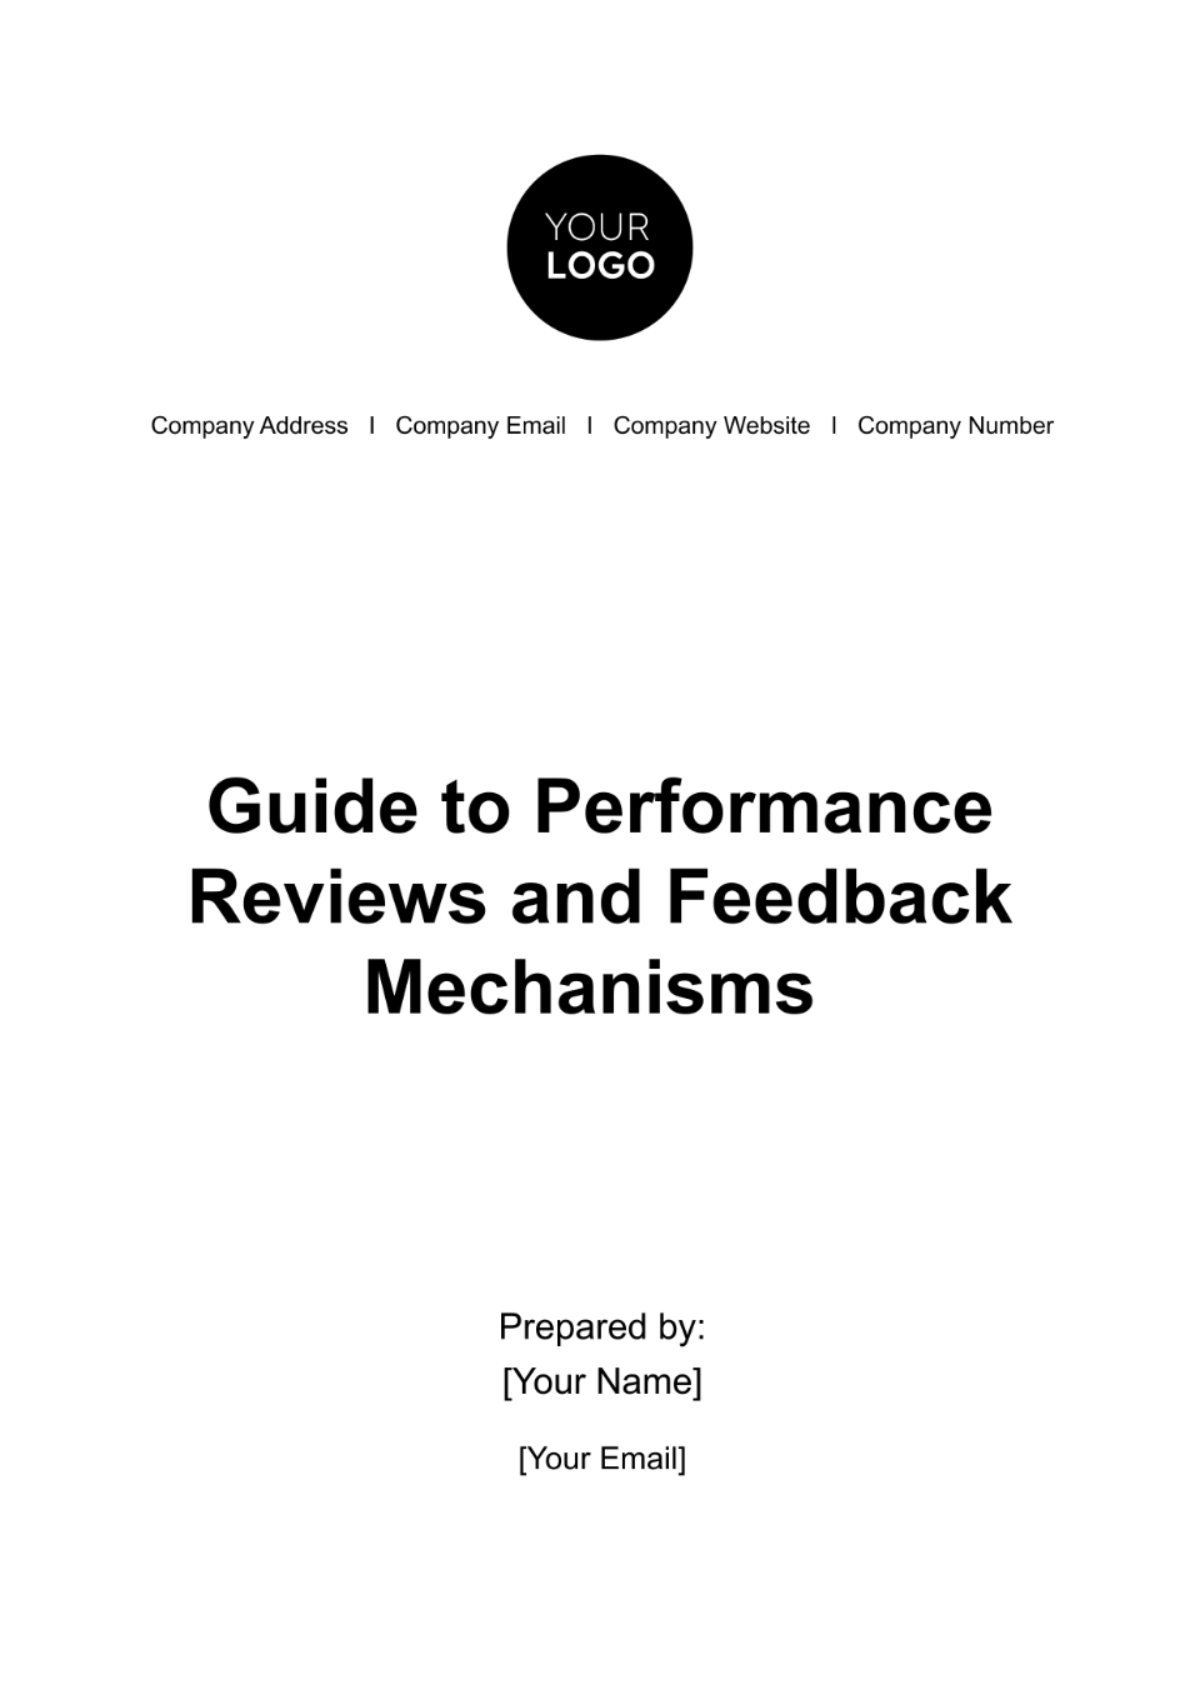 Guide to Performance Reviews and Feedback Mechanisms HR Template